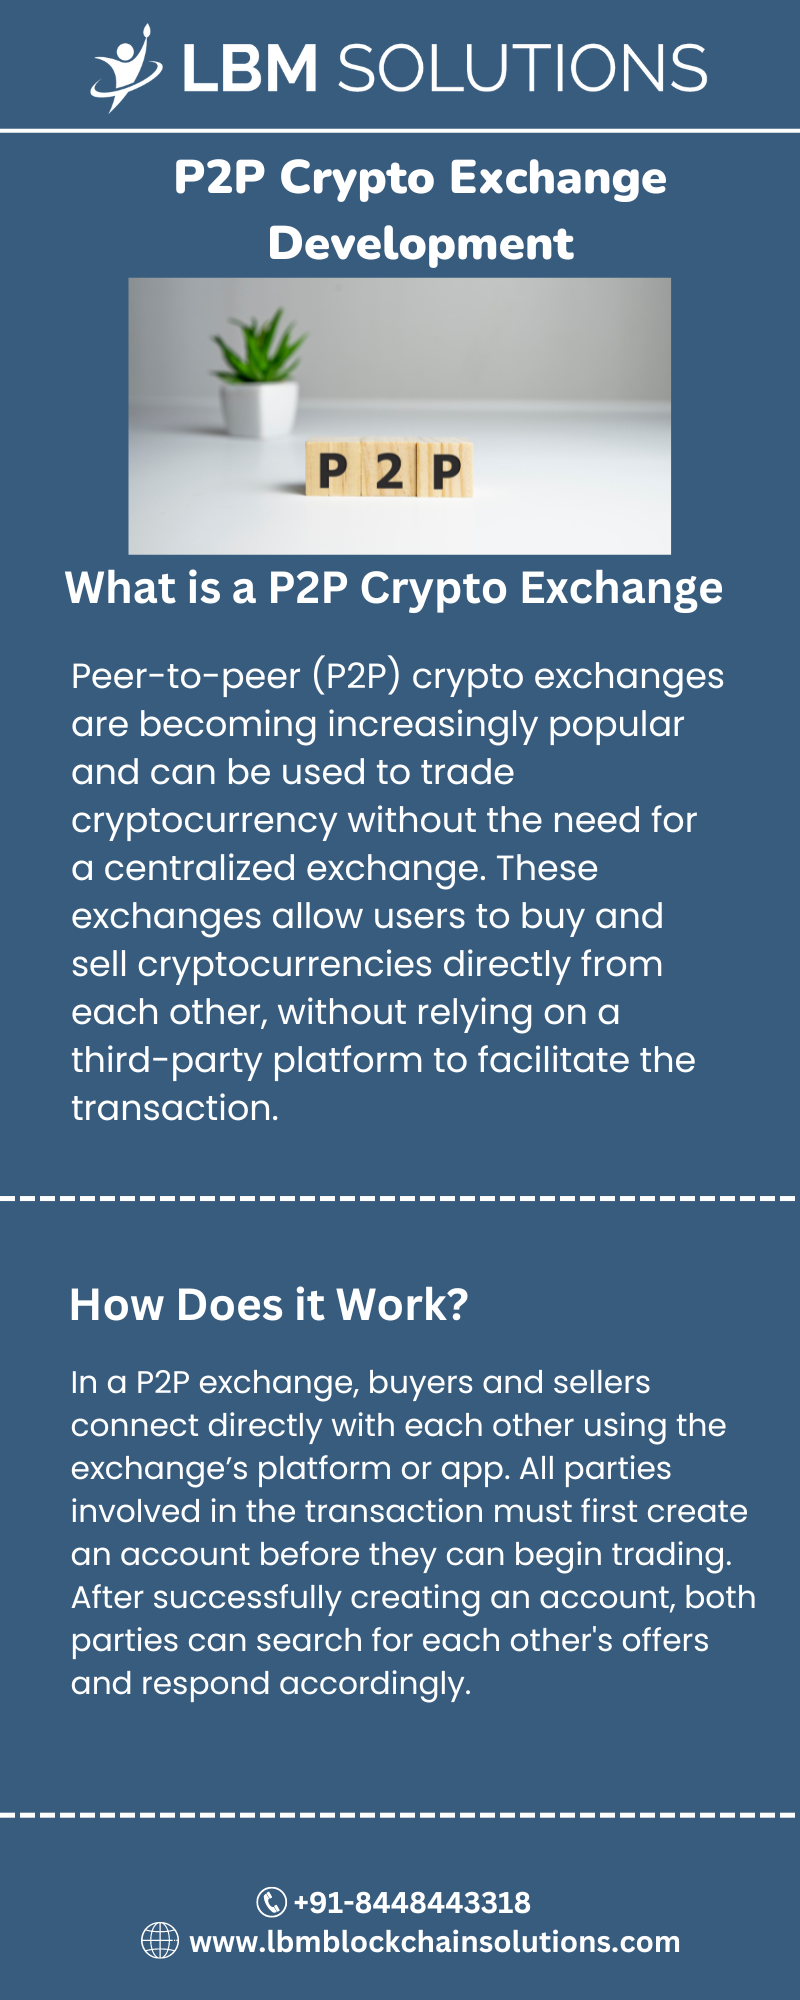 3 LBM SOLUTIONS

P2P Crypto Exchange
Development

 

What is a P2P Crypto Exchange

Peer-to-peer (P2P) crypto exchanges
are becoming increasingly popular
and can be used to trade
cryptocurrency without the need for
a centralized exchange. These
exchanges allow users to buy and
sell cryptocurrencies directly from
each other, without relying on a
third-party platform to facilitate the
transaction.

How Does it Work?

In a P2P exchange, buyers and sellers
connect directly with each other using the
exchange'’s platform or app. All parties
involved in the transaction must first create
an account before they can begin trading.
After successfully creating an account, both
parties can search for each other's offers
and respond accordingly.

© +91-8448443318
@) www.lbmblockchainsolutions.com